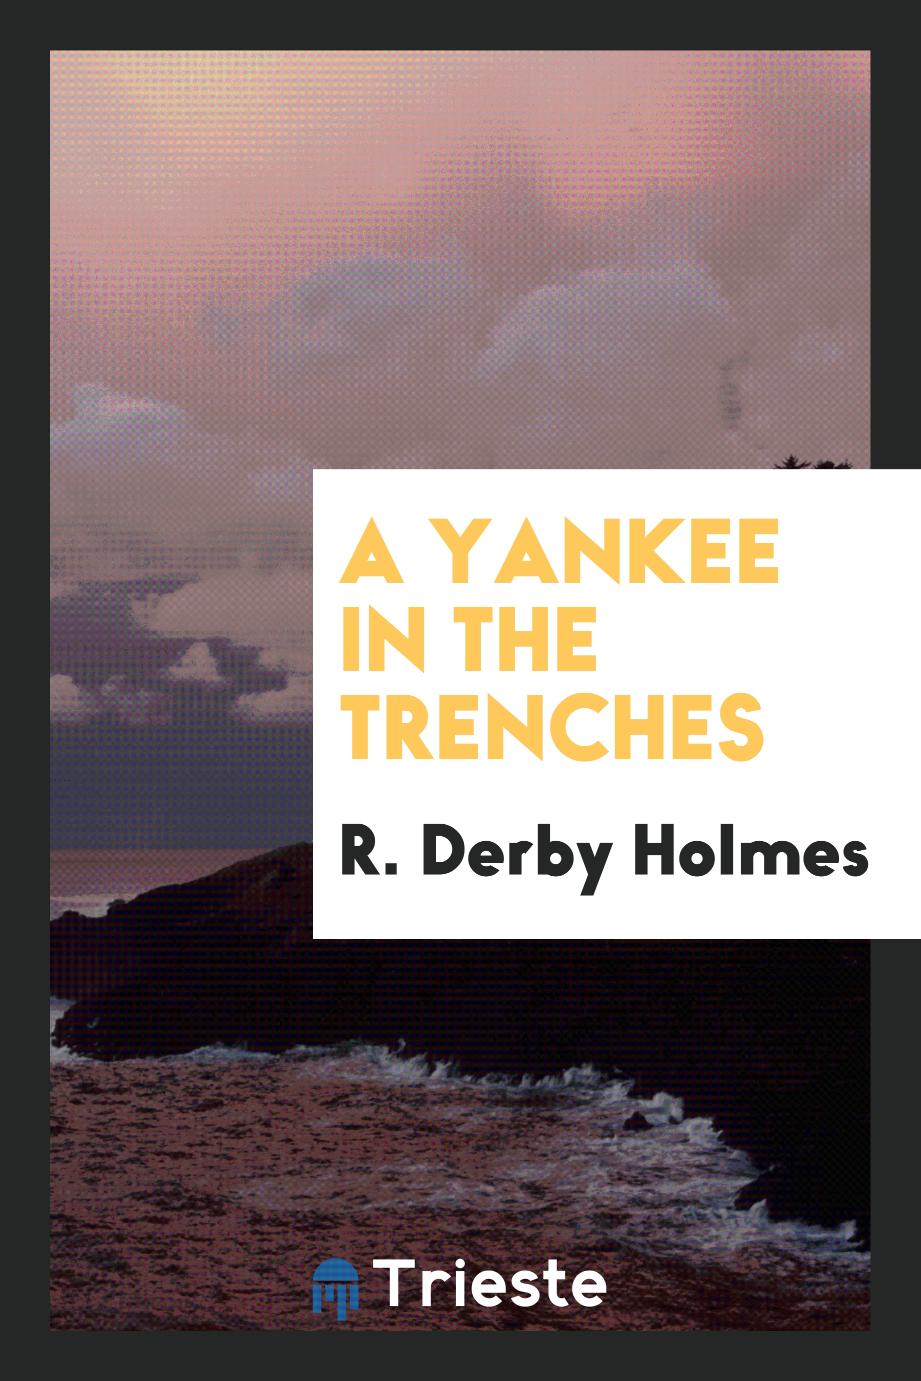 A Yankee in the trenches